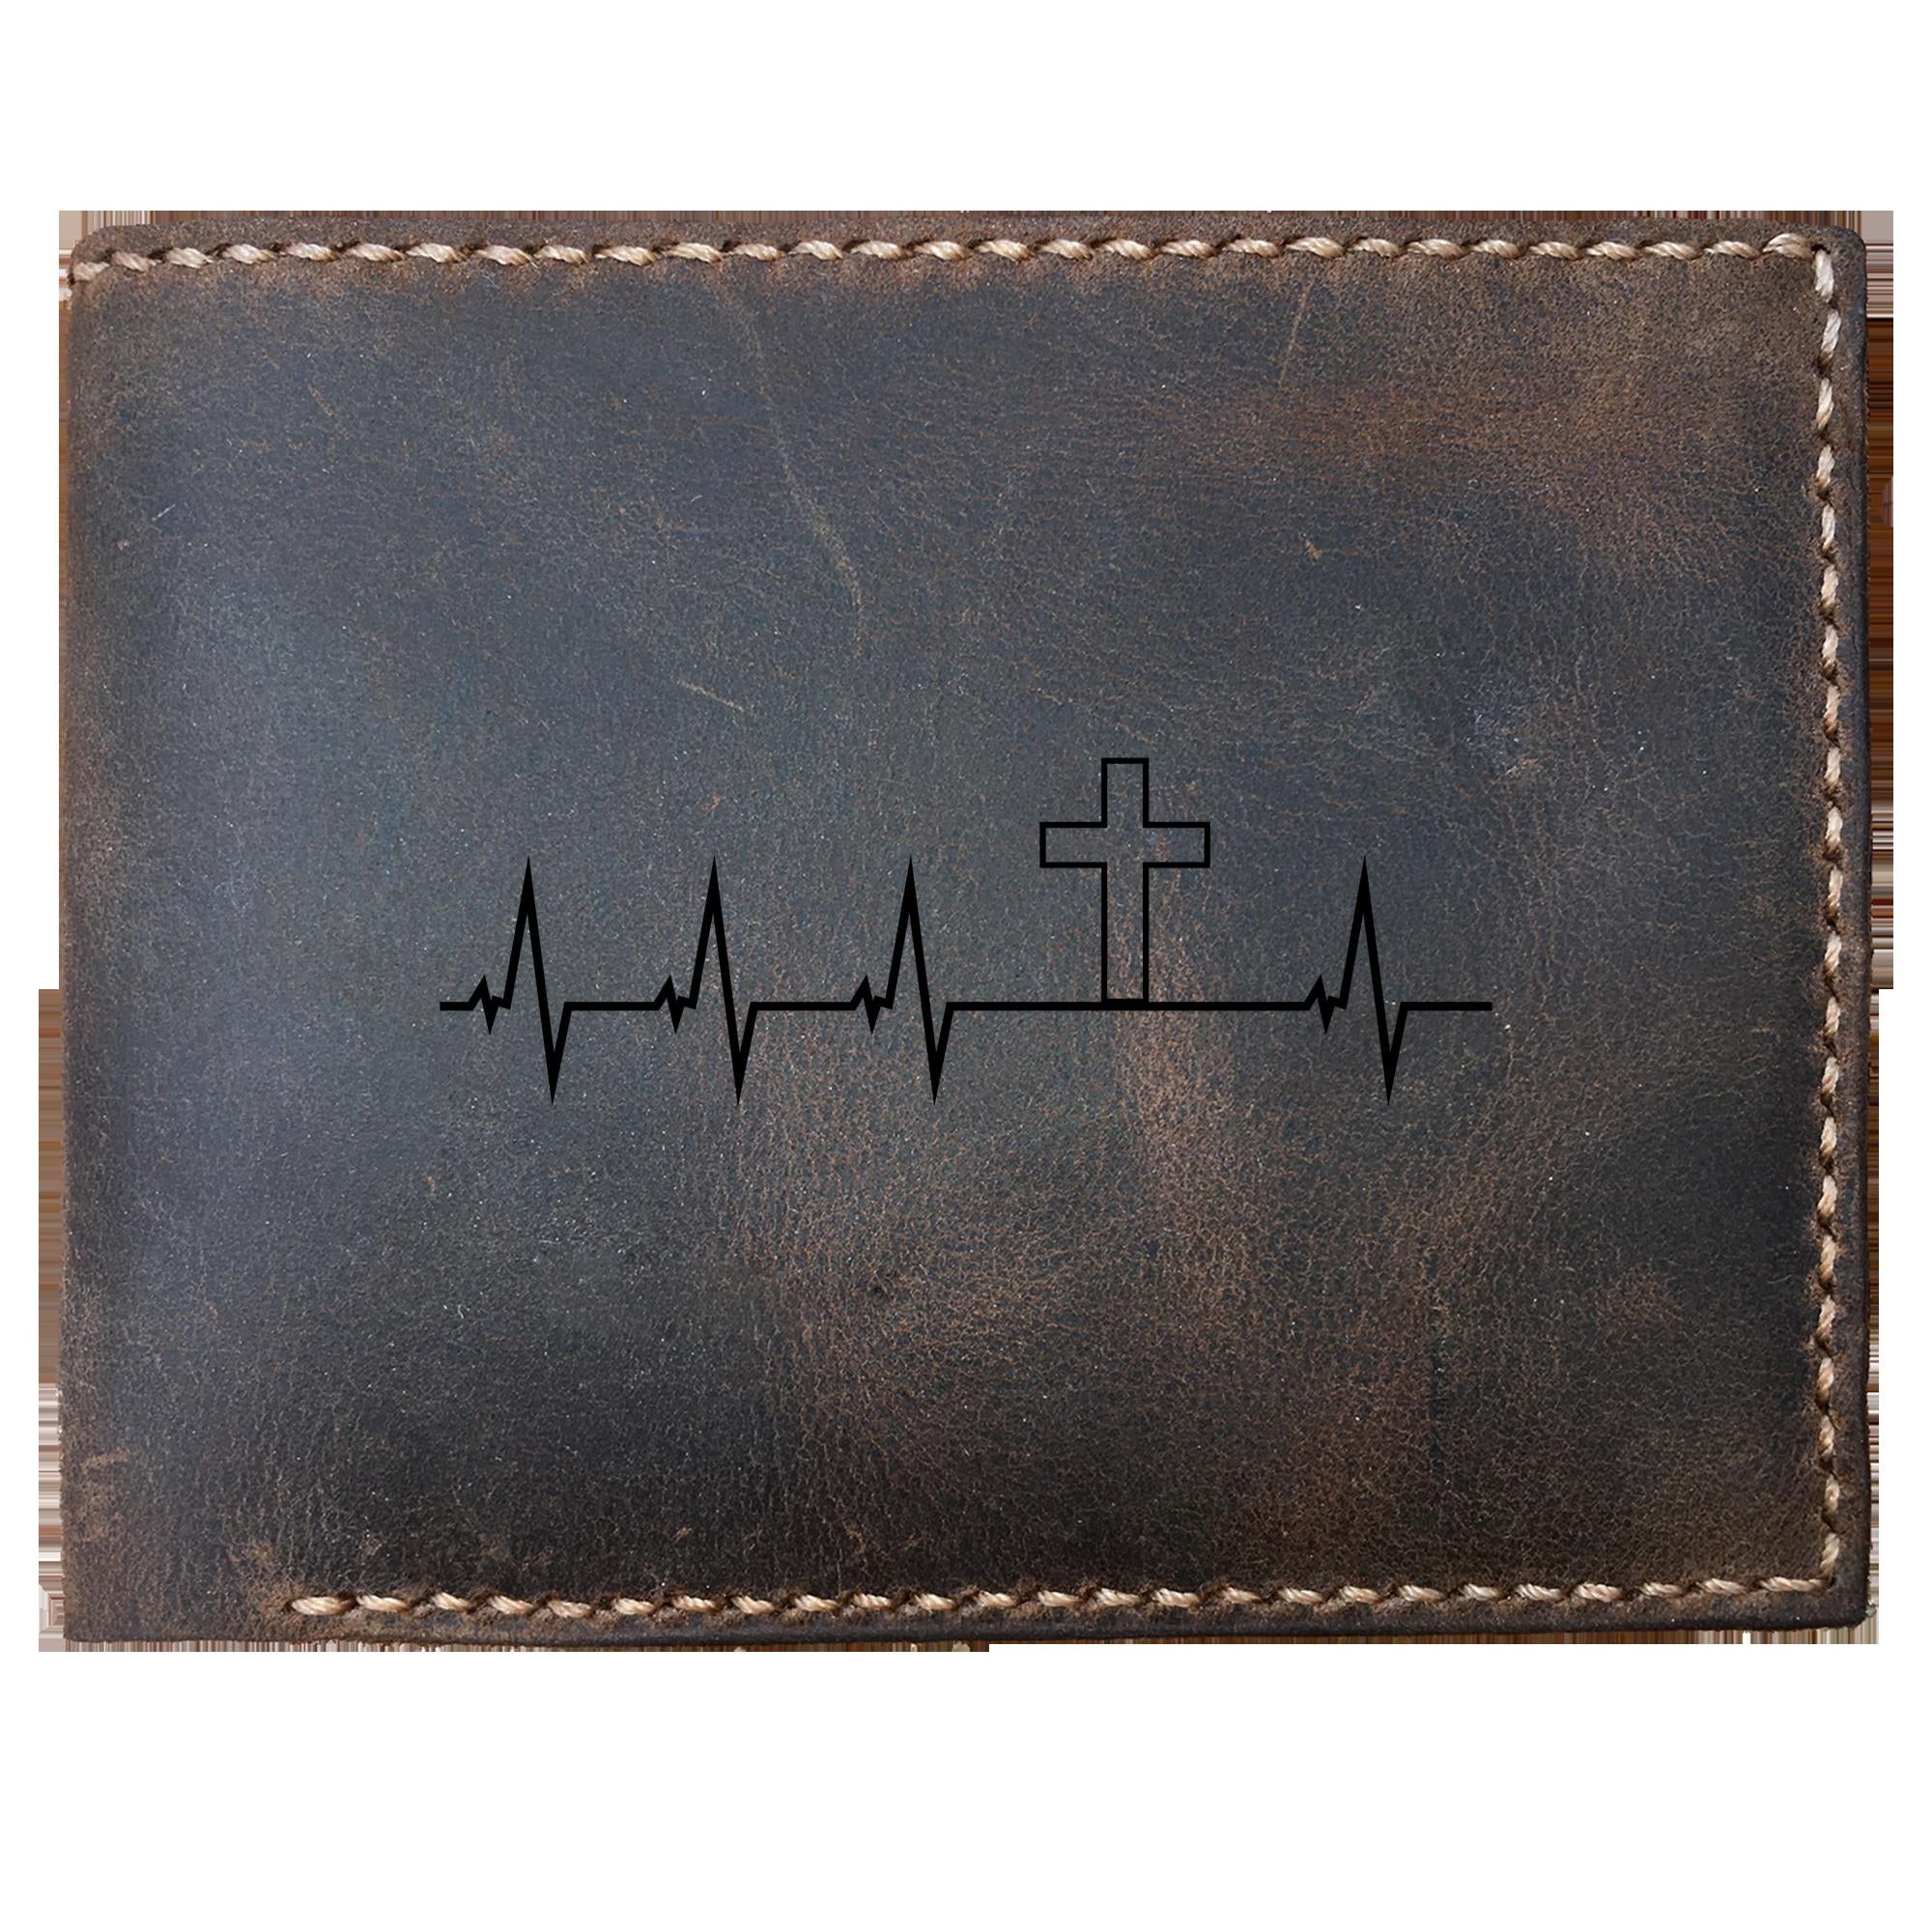 Skitongifts Funny Custom Laser Engraved Bifold Leather Wallet For Men, Silver Cross Hearbeat These Make Greats For Anyone